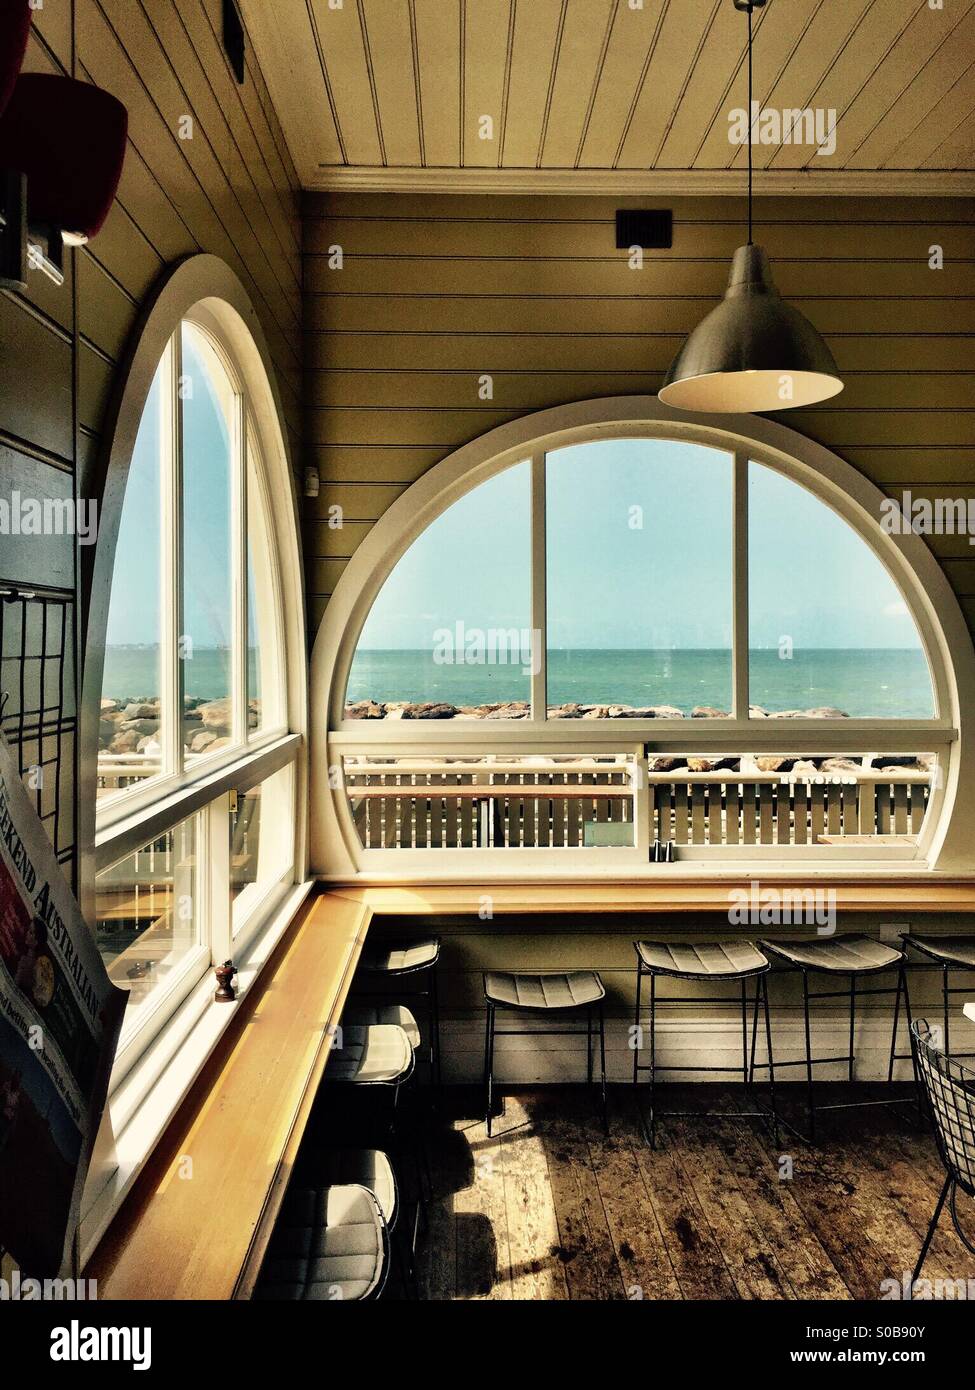 The cafe at St Kilda Pier, Melbourne showing it's amazing round windows Stock Photo